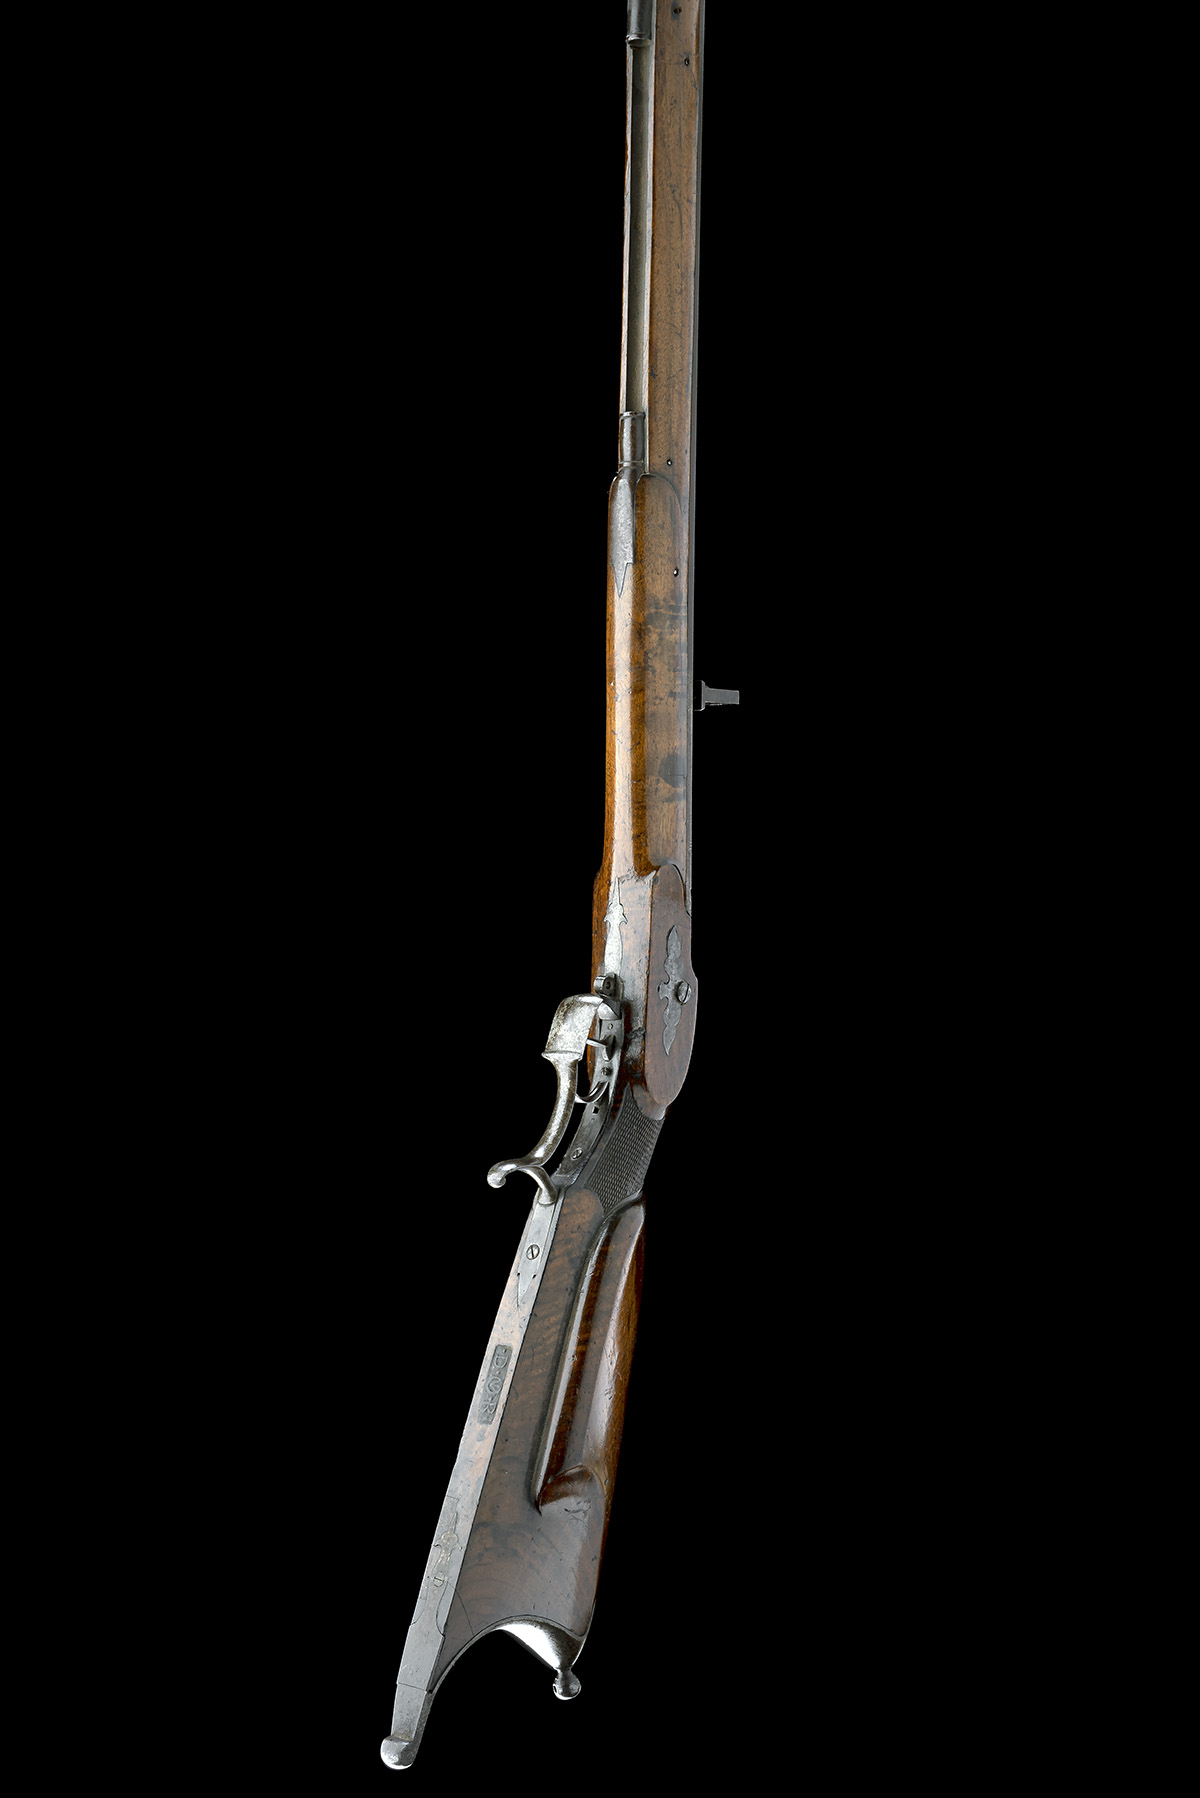 L. WINTER, THUSIS A 22-BORE PERCUSSION MATCH-RIFLE, serial no. 38, Swiss circa 1810 and converted - Image 8 of 8